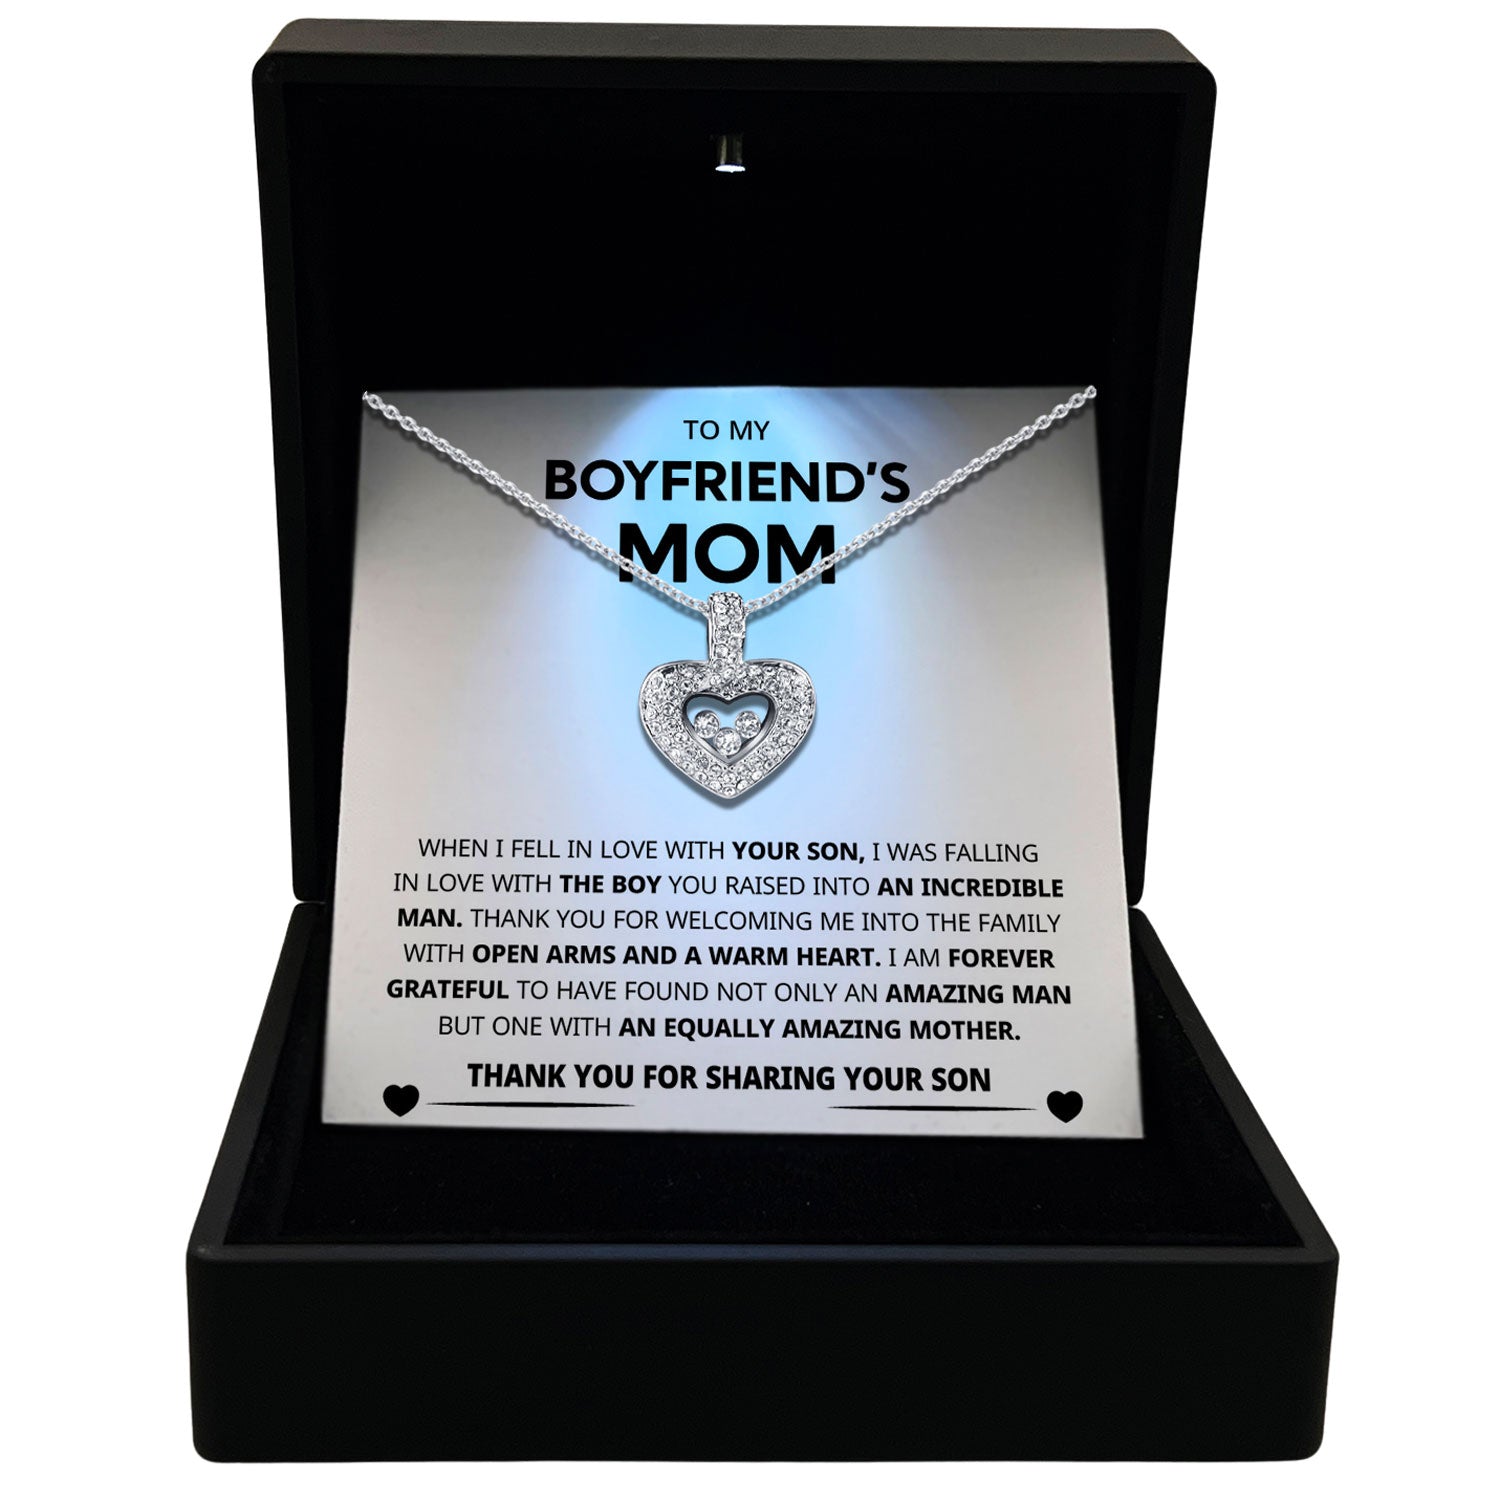 To My Boyfriend's Mom - Thank You For Sharing Your Son - Tryndi Floating Heart Necklace